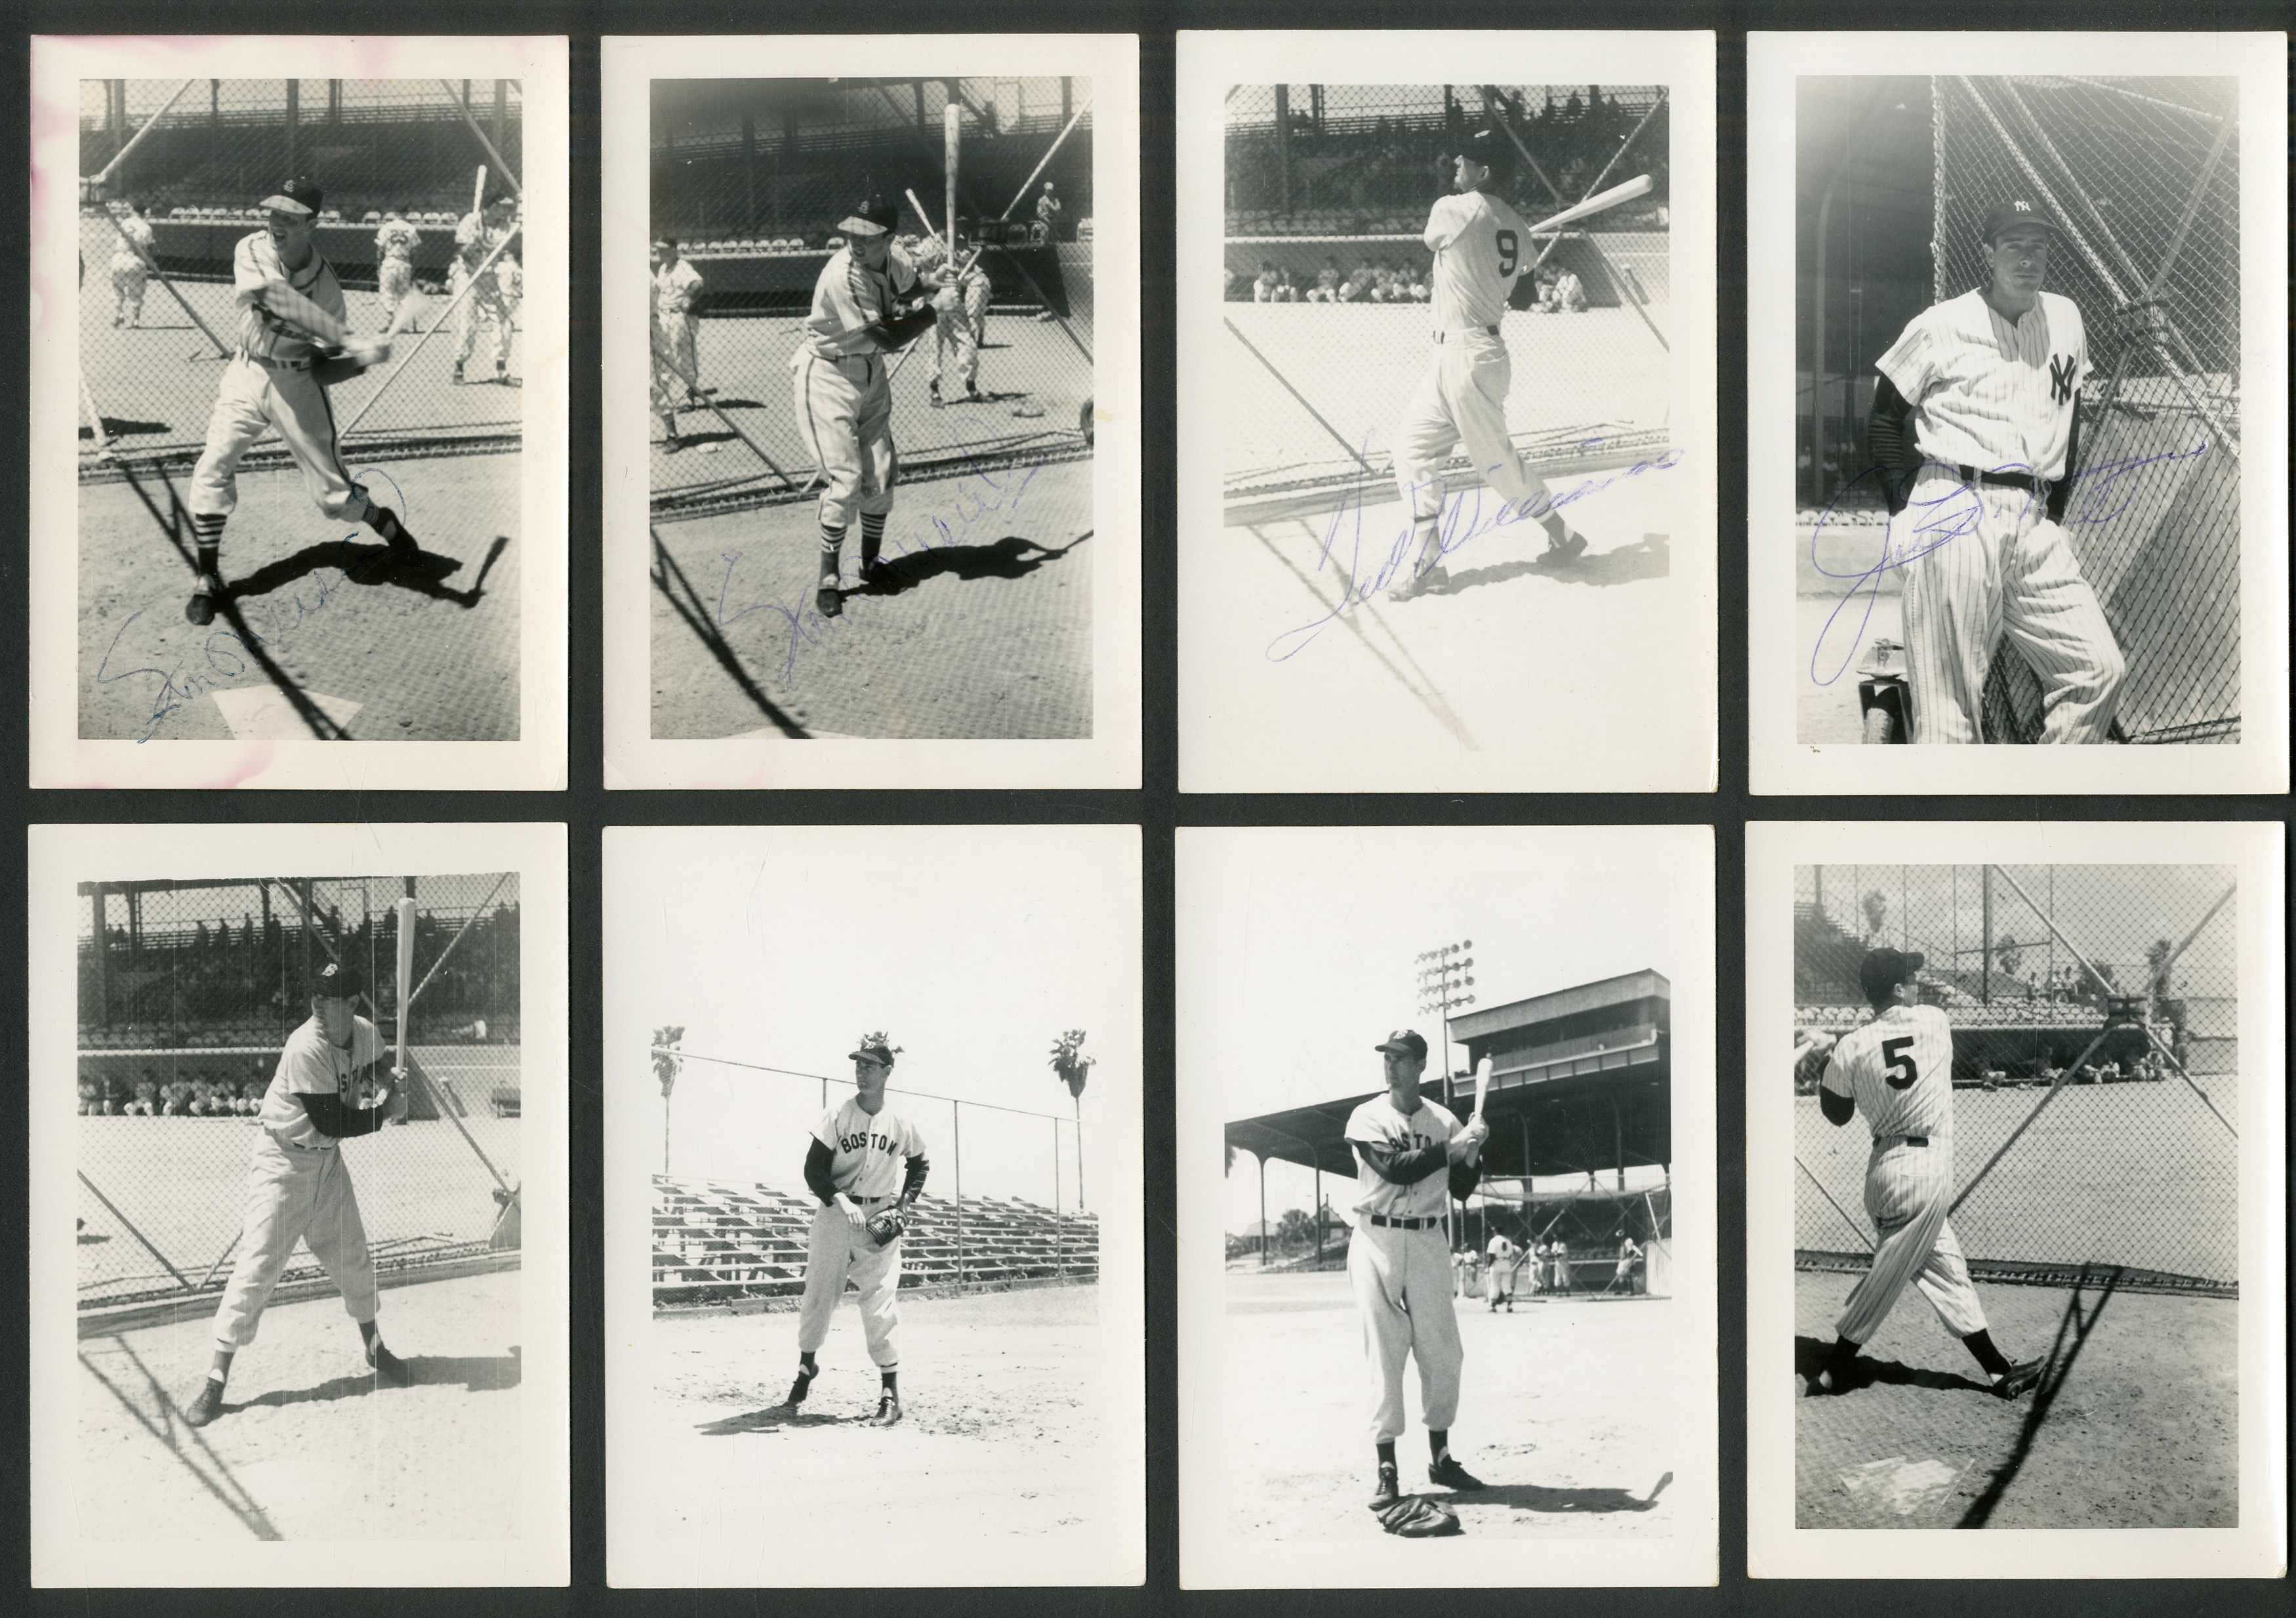 Vintage Sports Photographs - Type I Photograph Collection Taken by 1948 Cardinals Bat Boy - Some Signed with DiMaggio & Williams (100+)